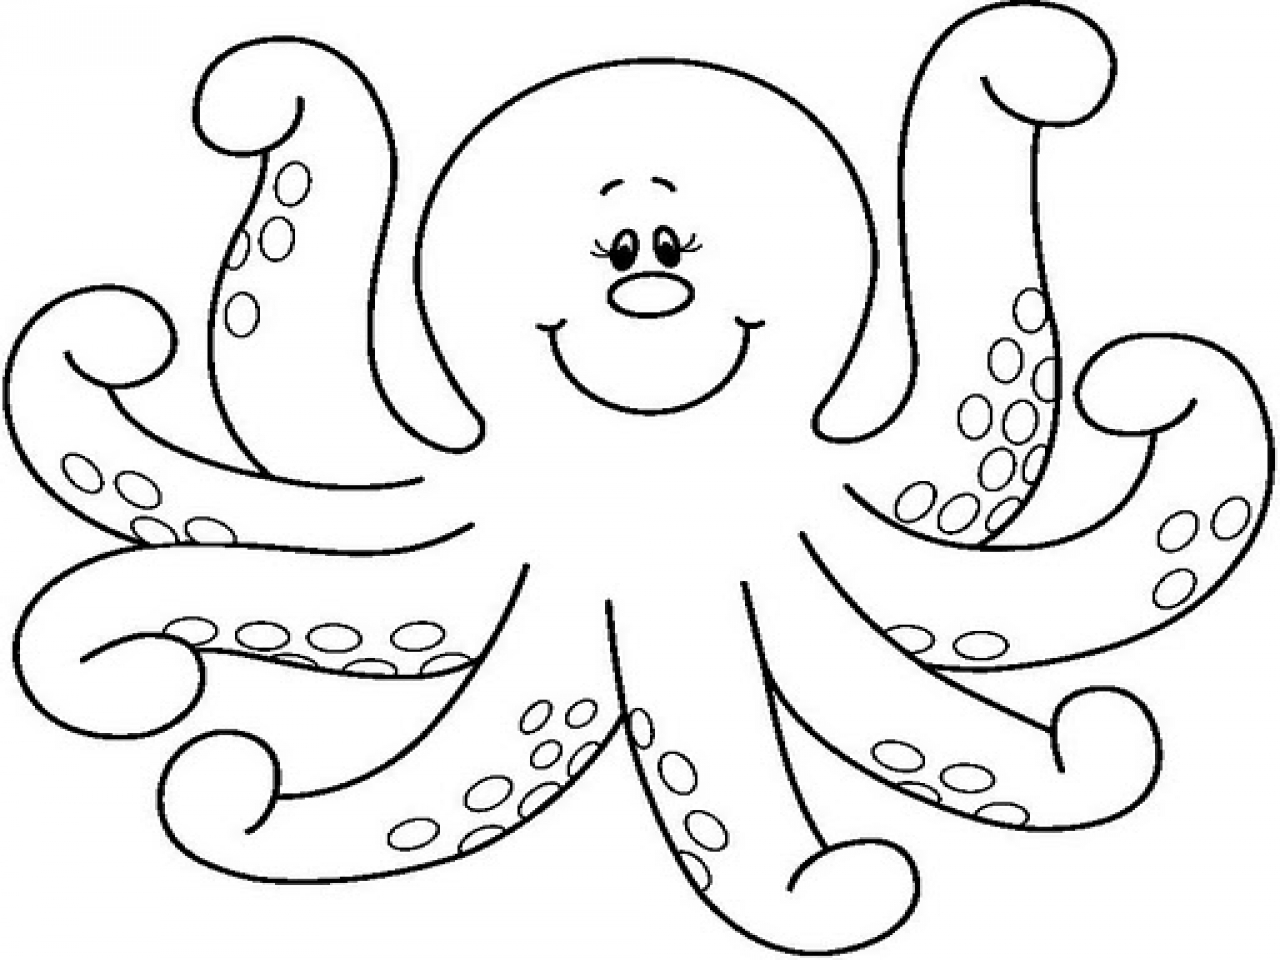 octopus black and white drawing